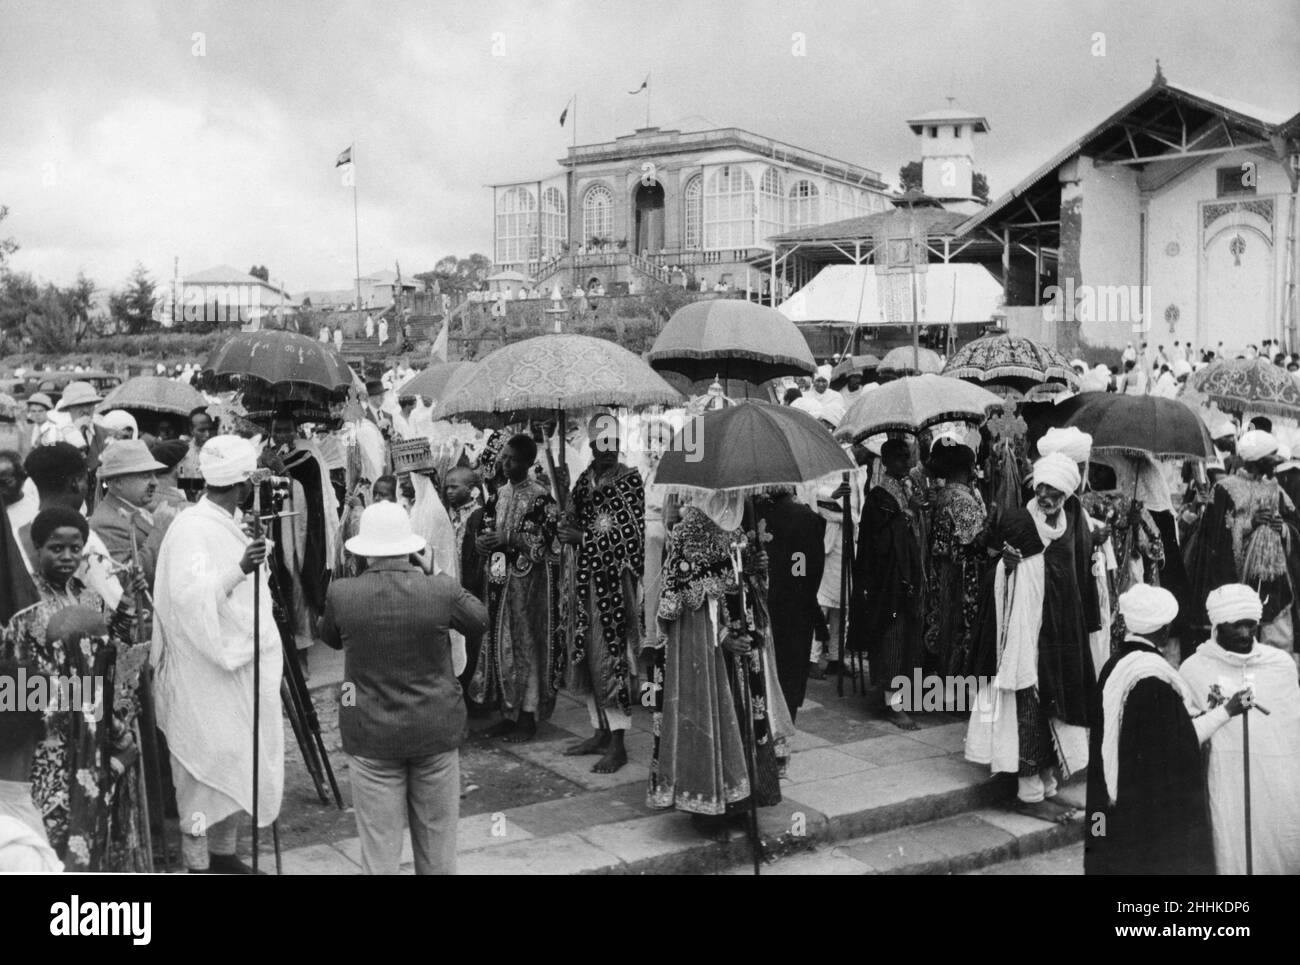 Abyssinian War September 1935Emperor Haile Selassie wearing a heavy crown and white veil with chiefs and other dignitaries, under ceremonial umbrellas, on the steps of the place in Addis Ababa at the beginning of the Meskel festival as Italian force threaten the borders. Stock Photo